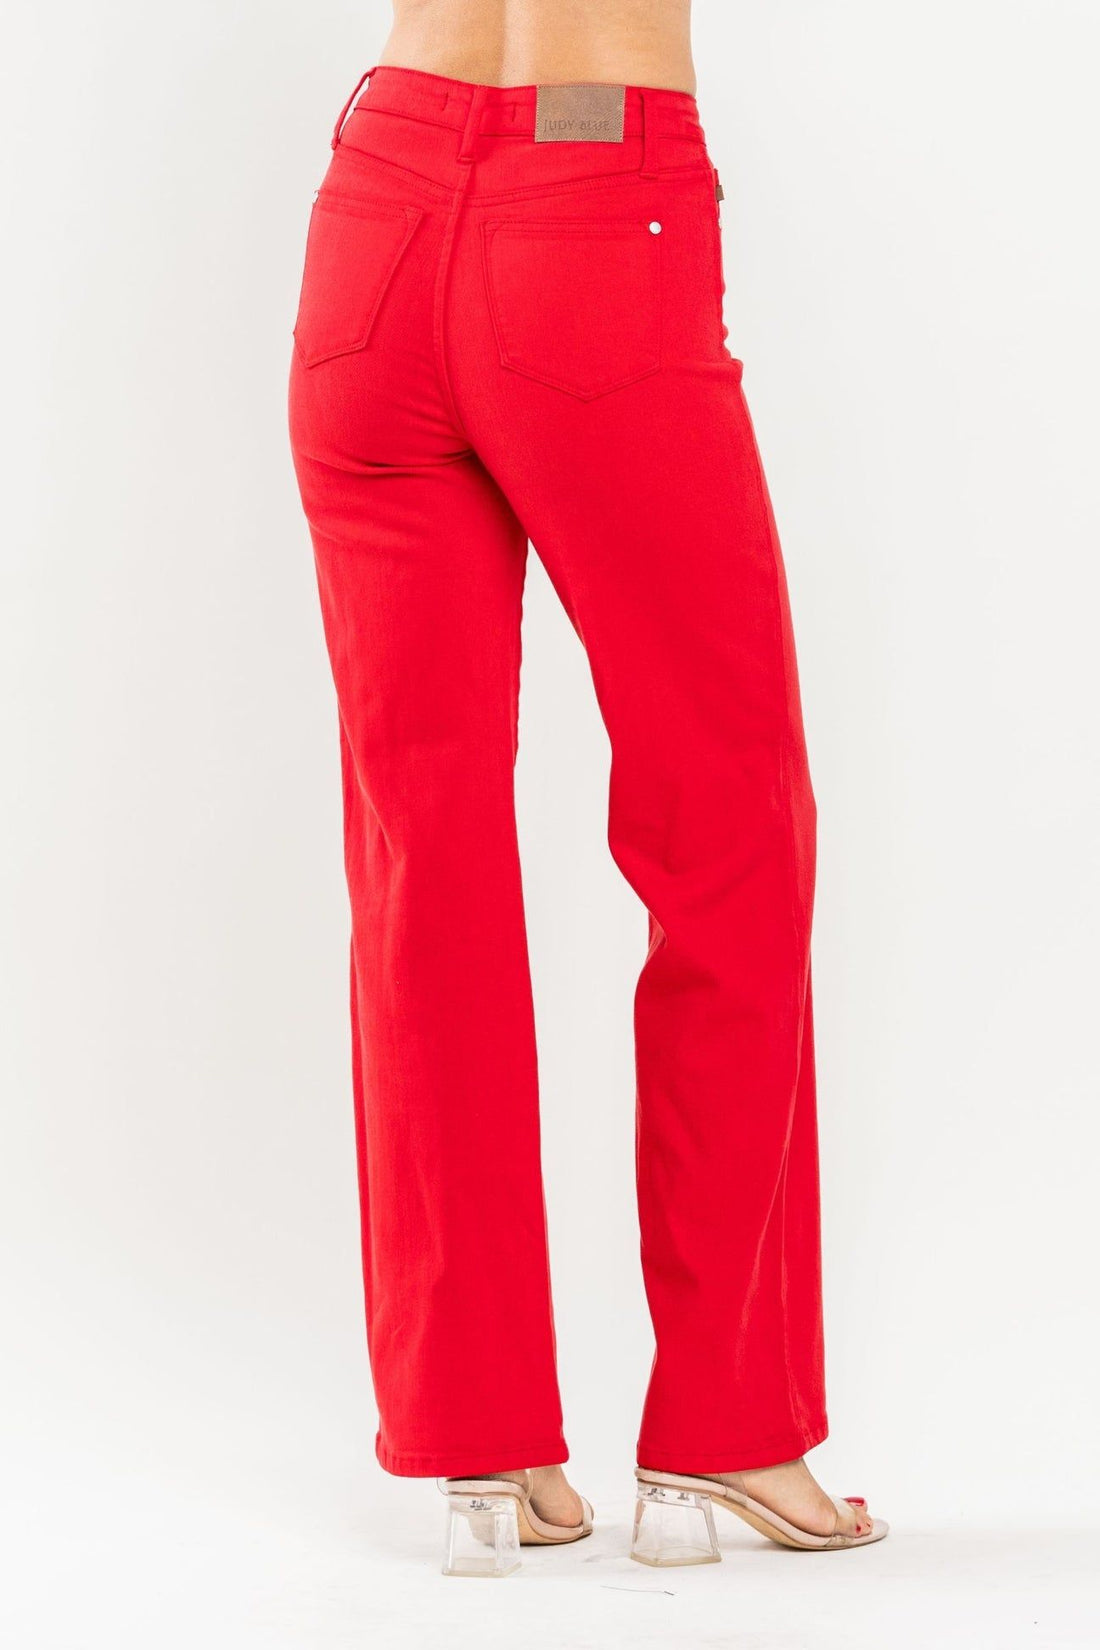 Judy blue High Waist Red Garment Dyed 90's Straight Jeans (reg and curvy)